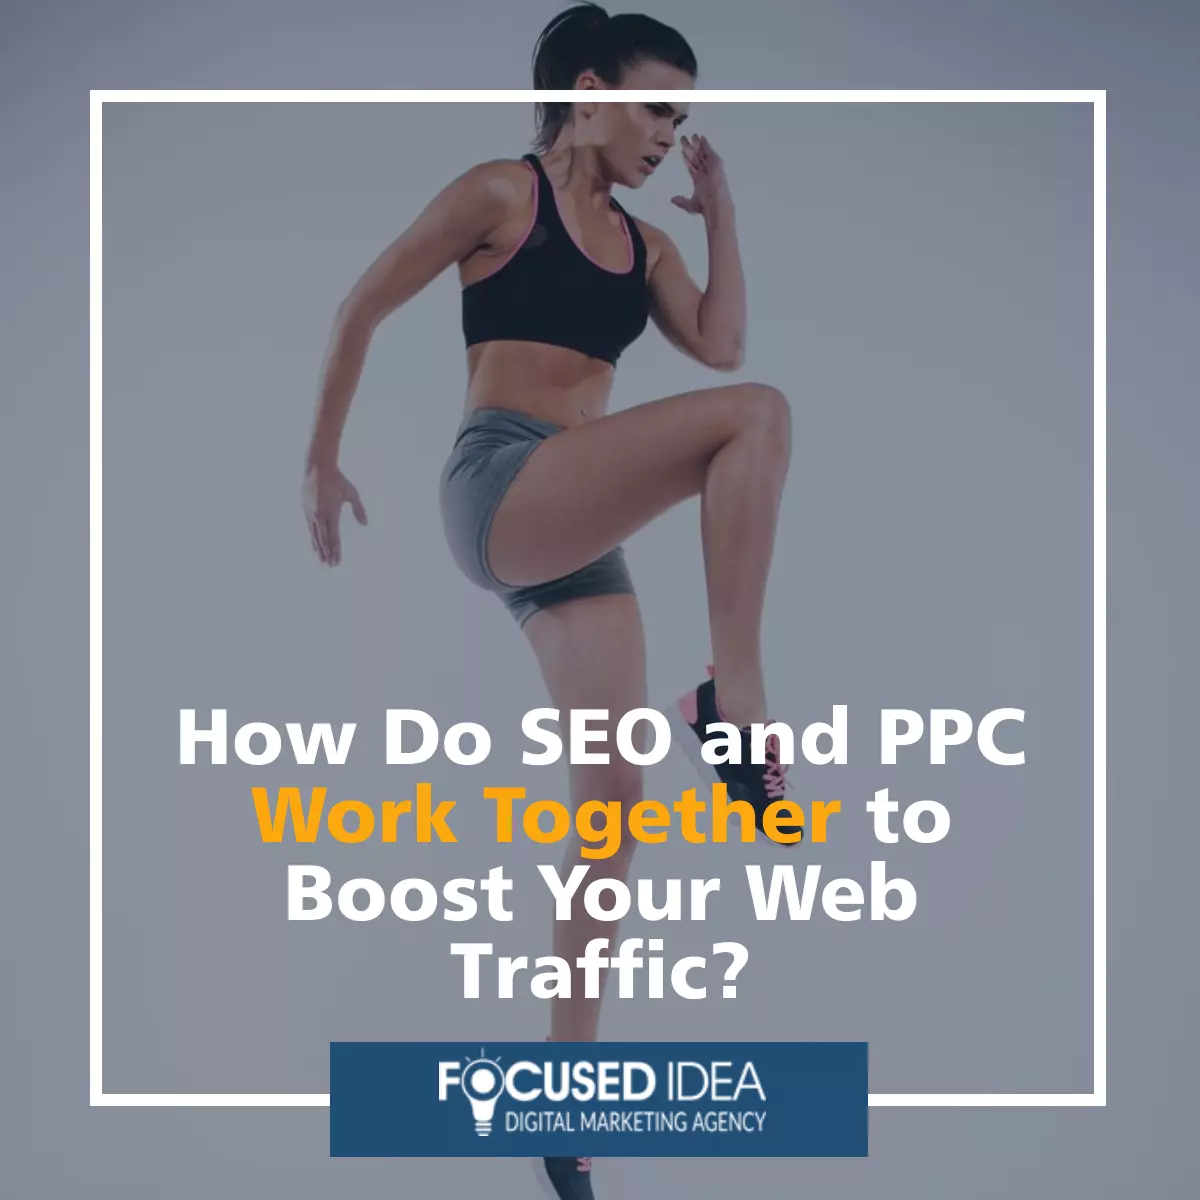 How Do SEO and PPC Work Together to Boost Your Web Traffic?